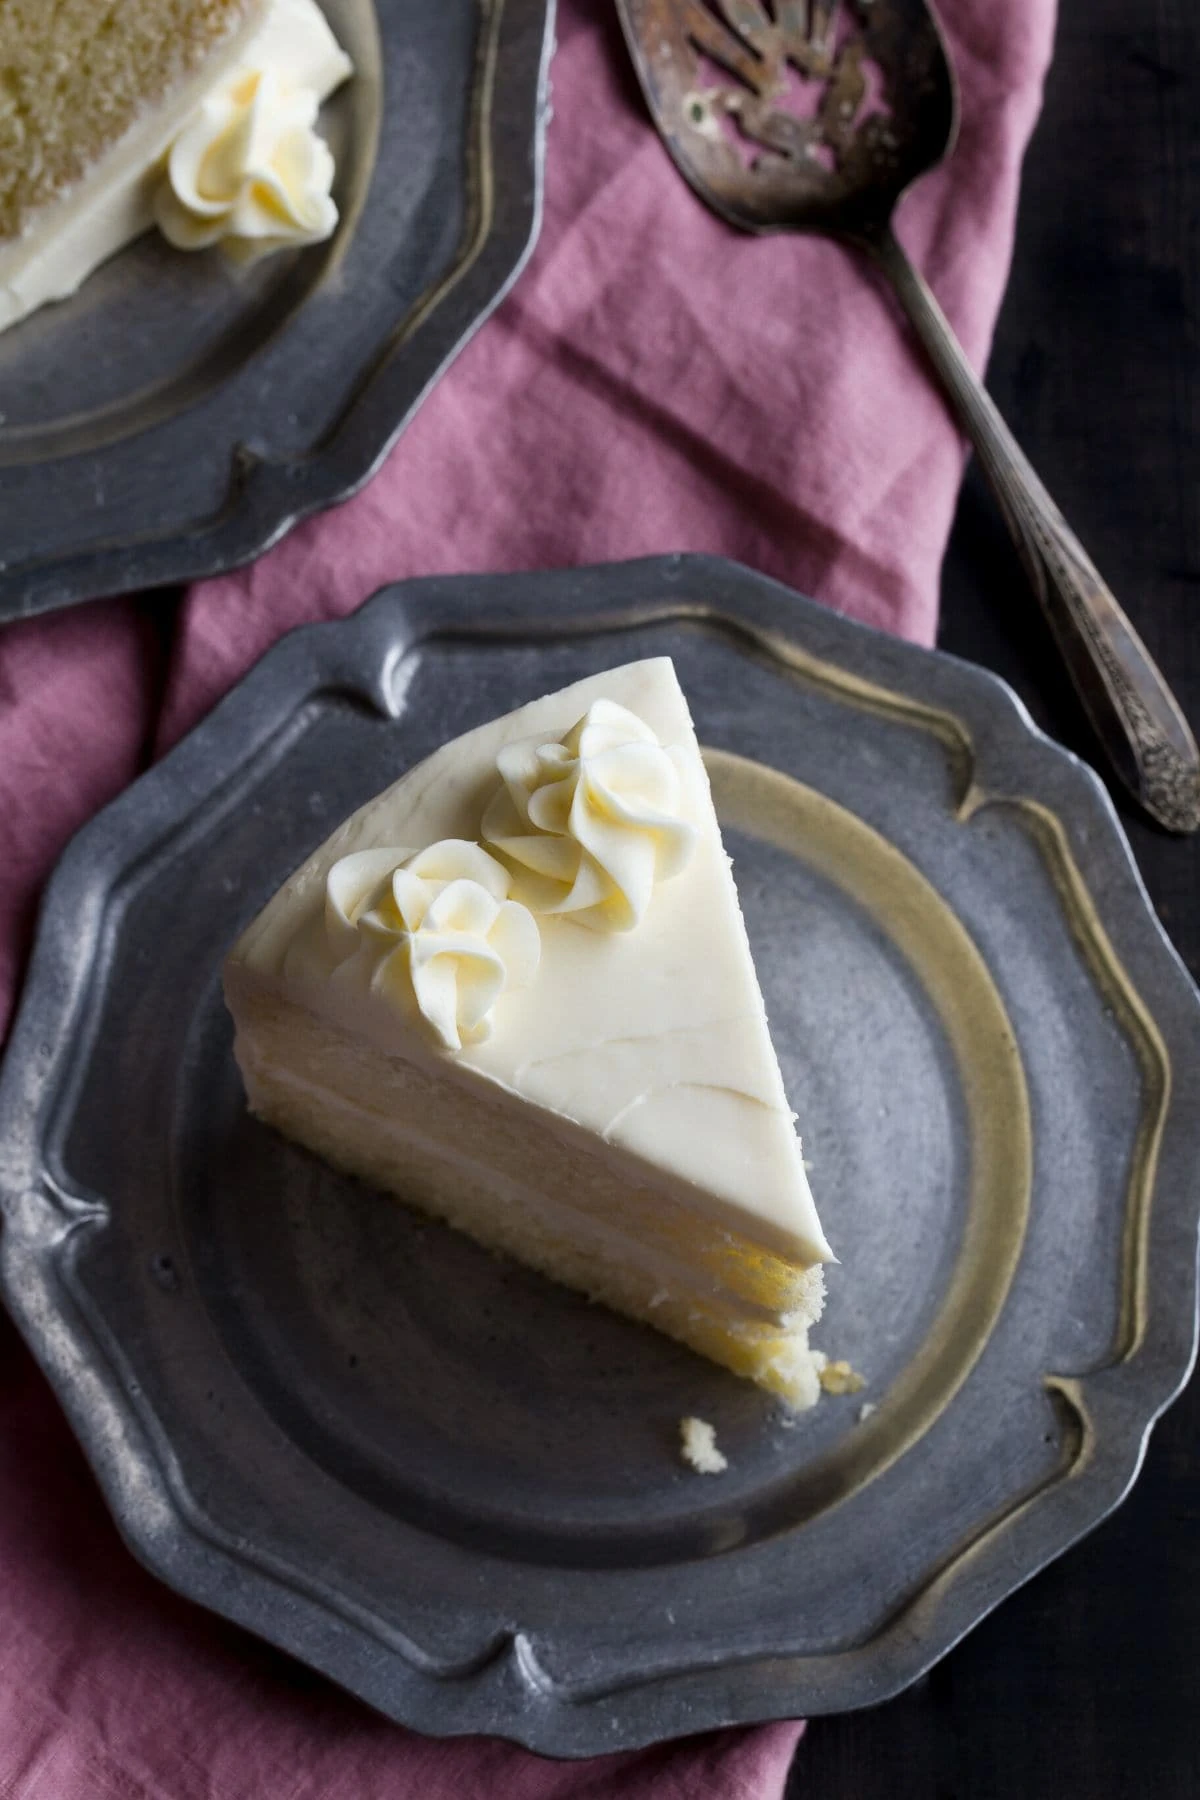 Overhead view of a slice of vanilla cake on a pewter plate.